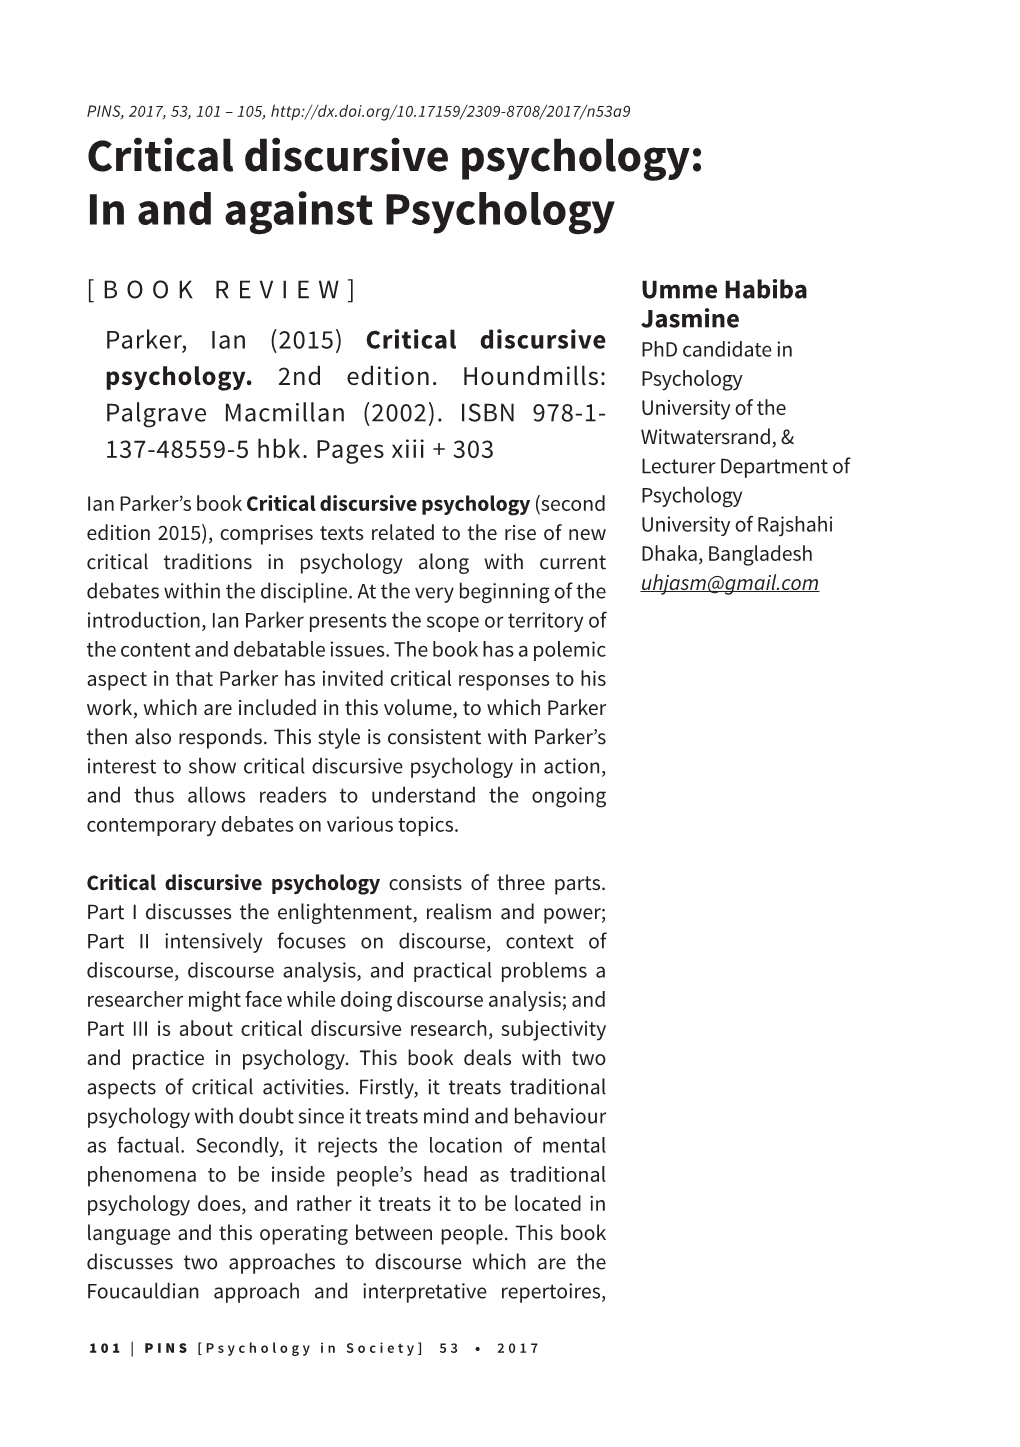 Critical Discursive Psychology: in and Against Psychology